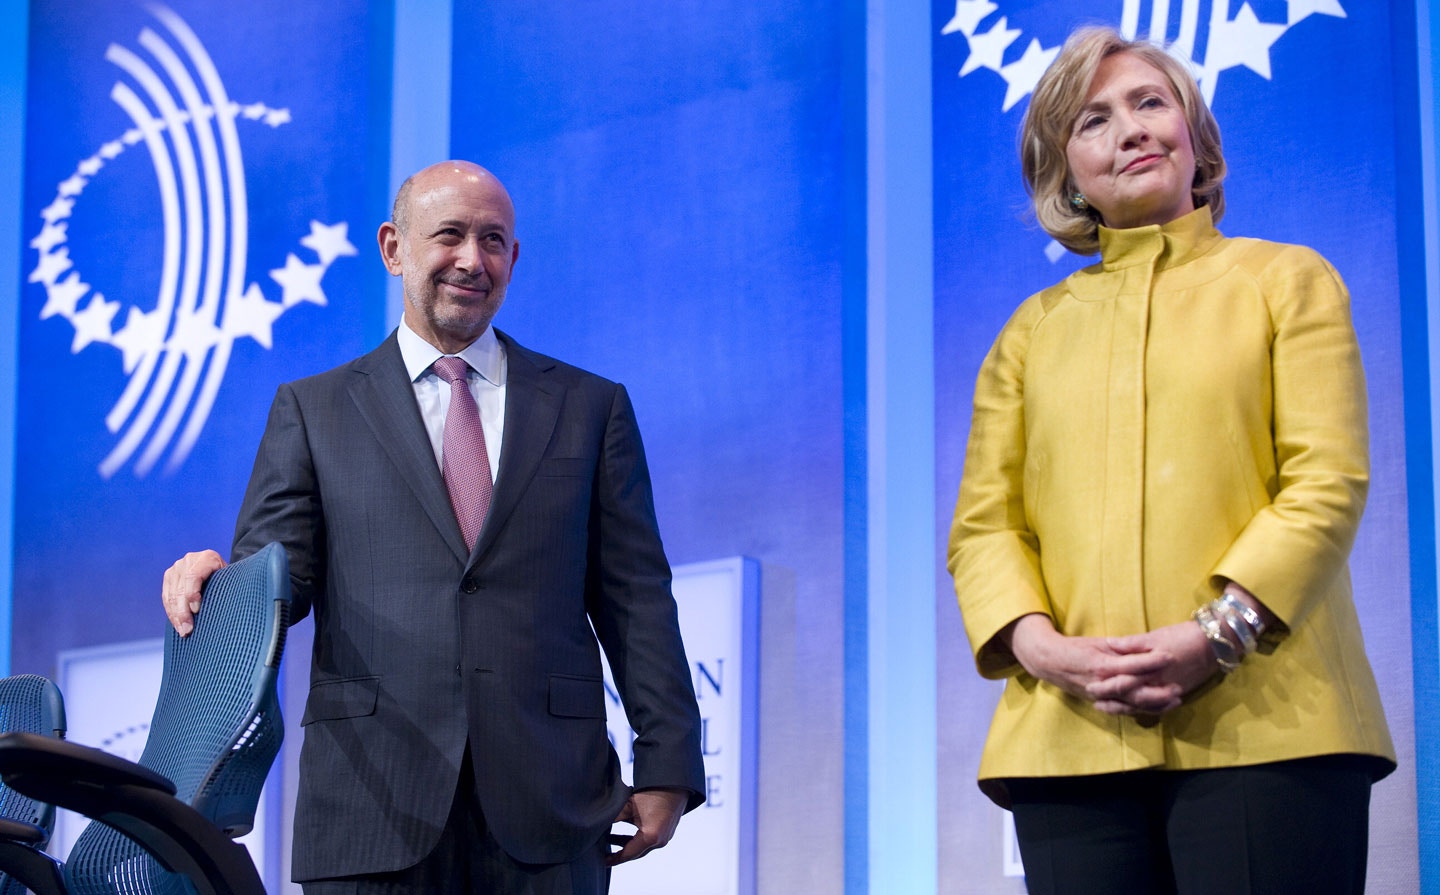 Lloyd Blankfein, Chairman & CEO, Goldman Sachs (L) stands on stage with former US Secretary of State Hillary Clinton during the 2014 Clinton Global Initiative annual meeting in New York September 24, 2014. AFP PHOTO/STEPHEN CHERNIN        (Photo credit should read STEPHEN CHERNIN/AFP/Getty Images)